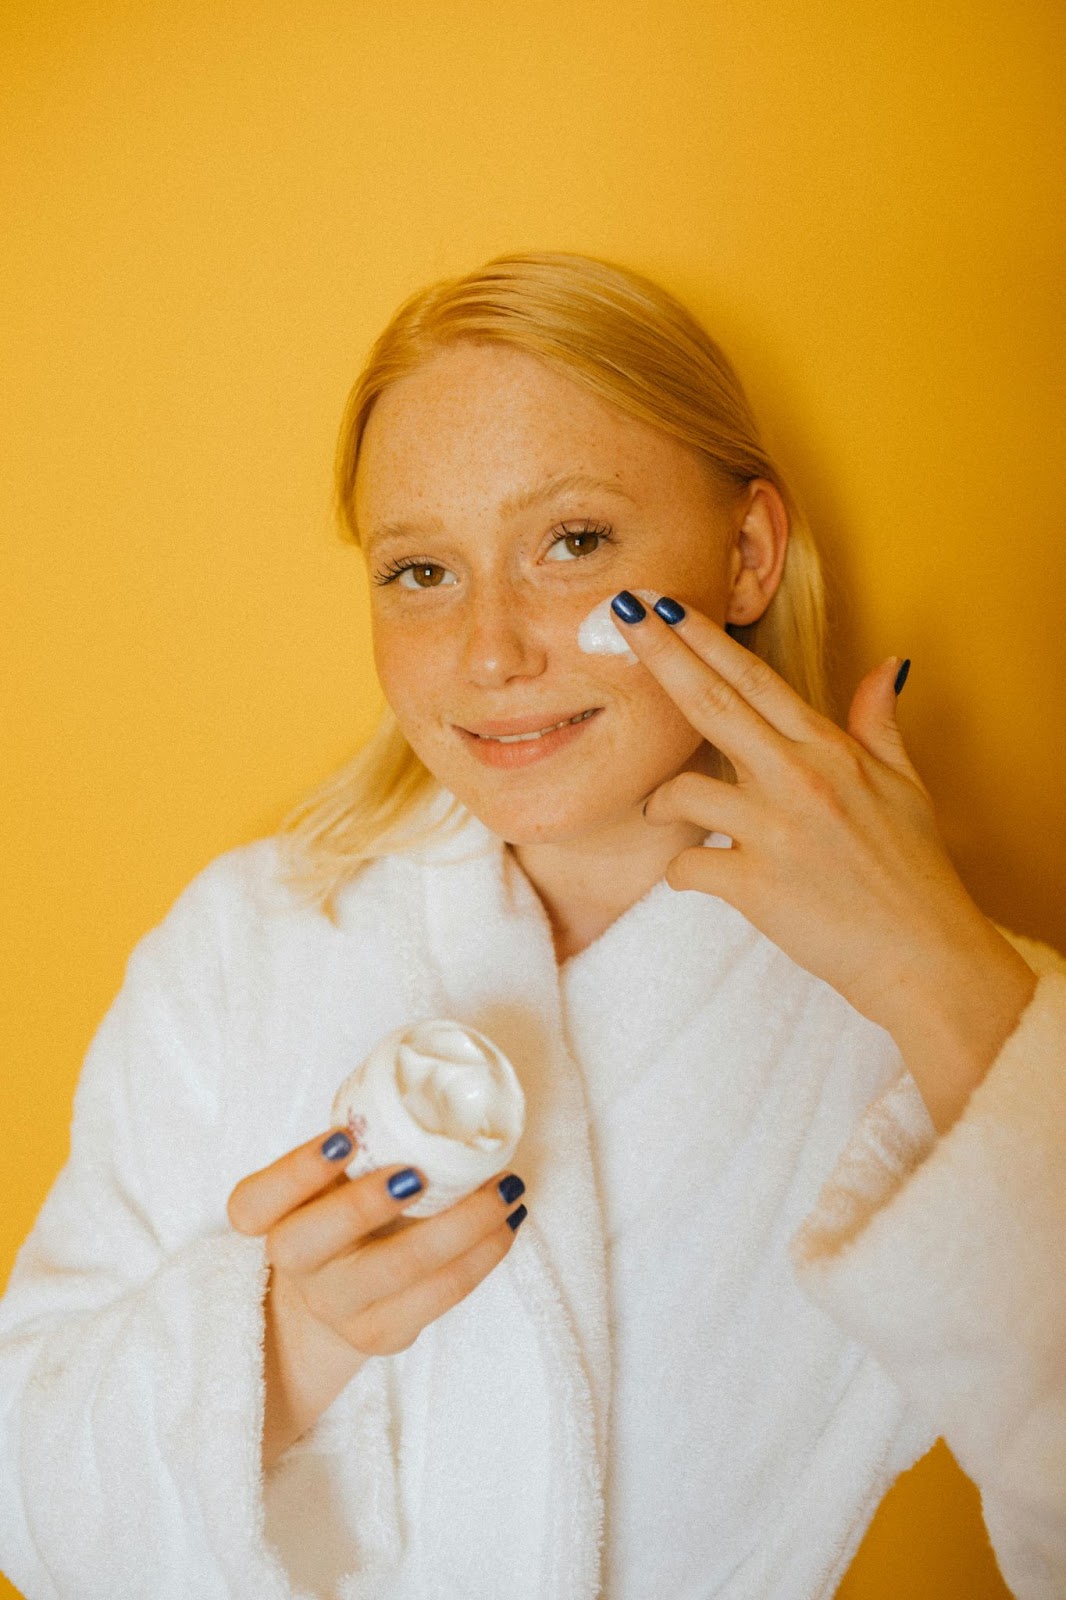 white woman with strawberry blonde har applying ayurveda based facial moisturizer.